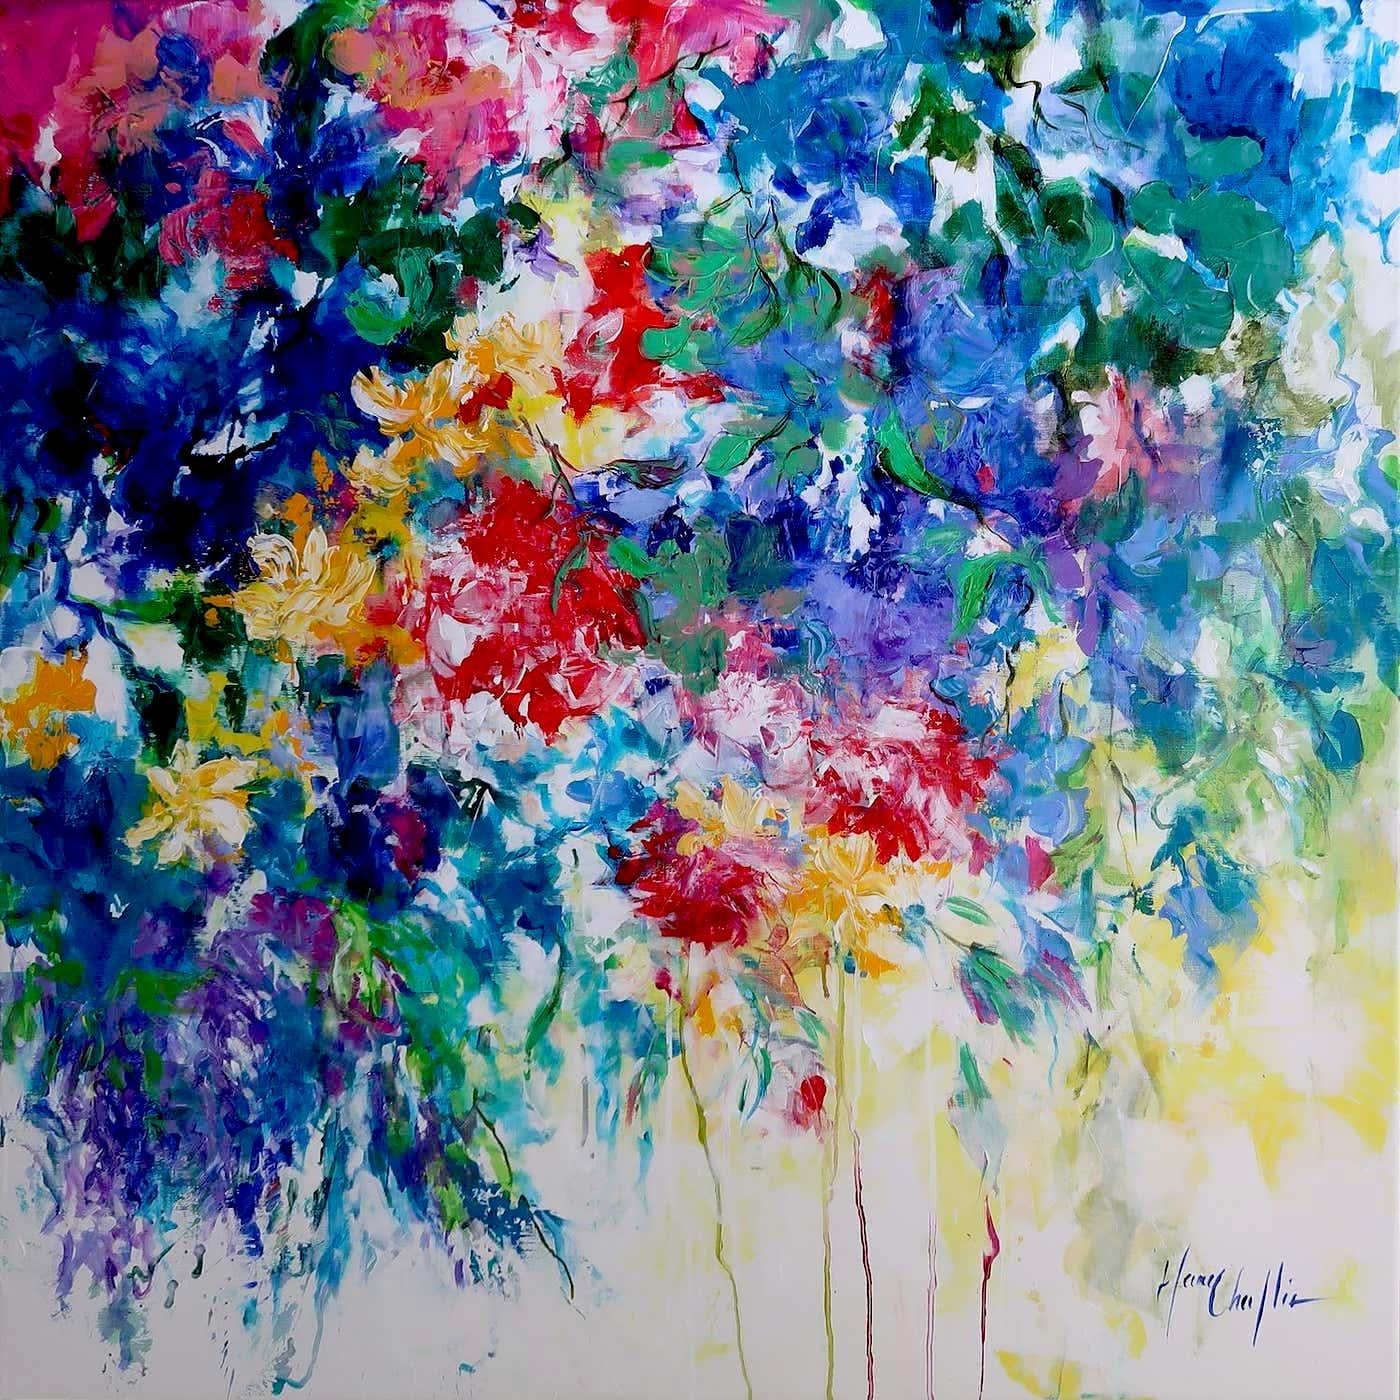 Abstract Painting Mary Chaplin - Wisteria and Roses-original abstract floral landscape painting-contemporary Art